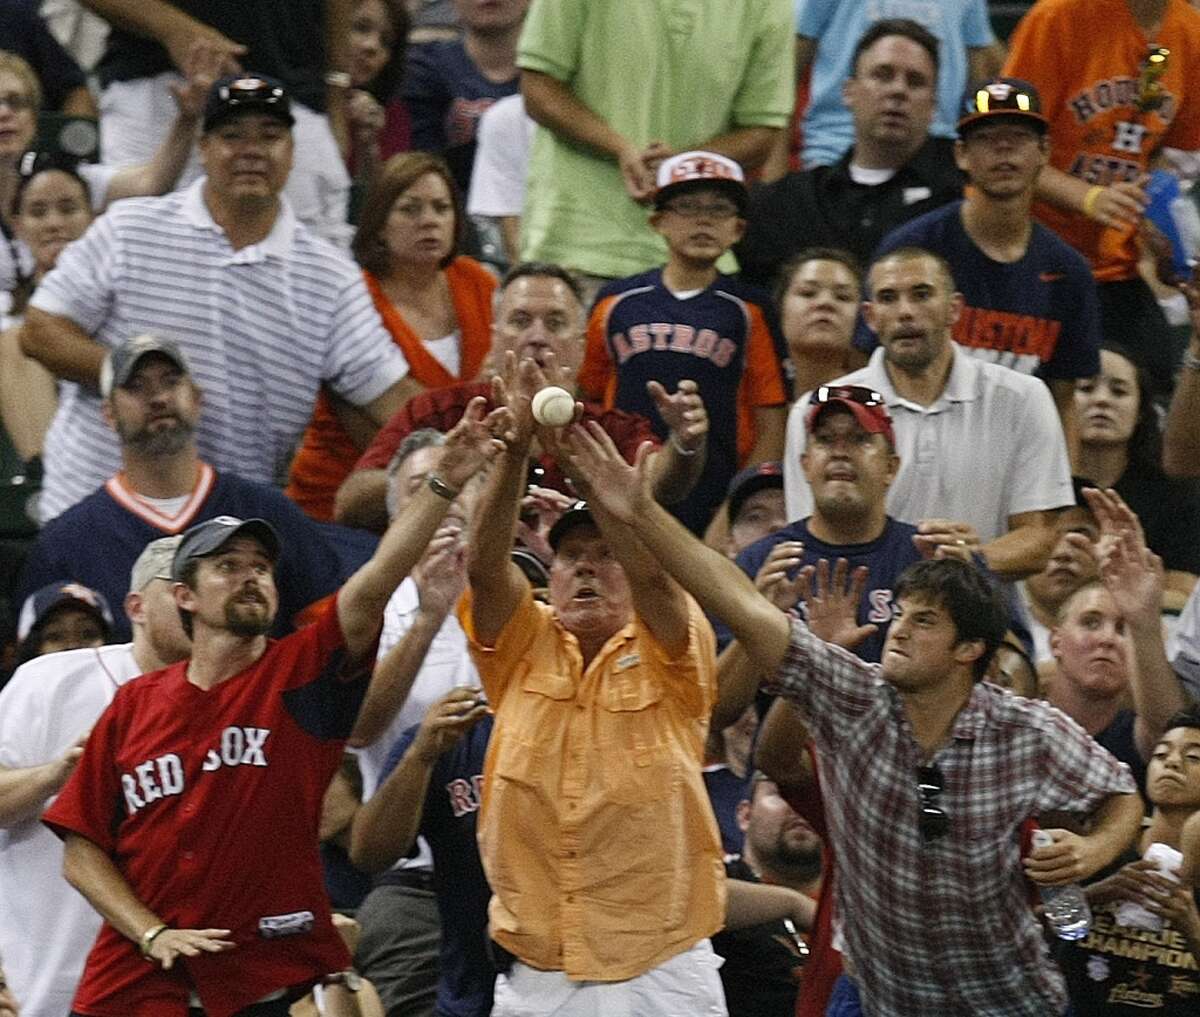 Extremely upsetting' that girl was struck by foul ball at Astros